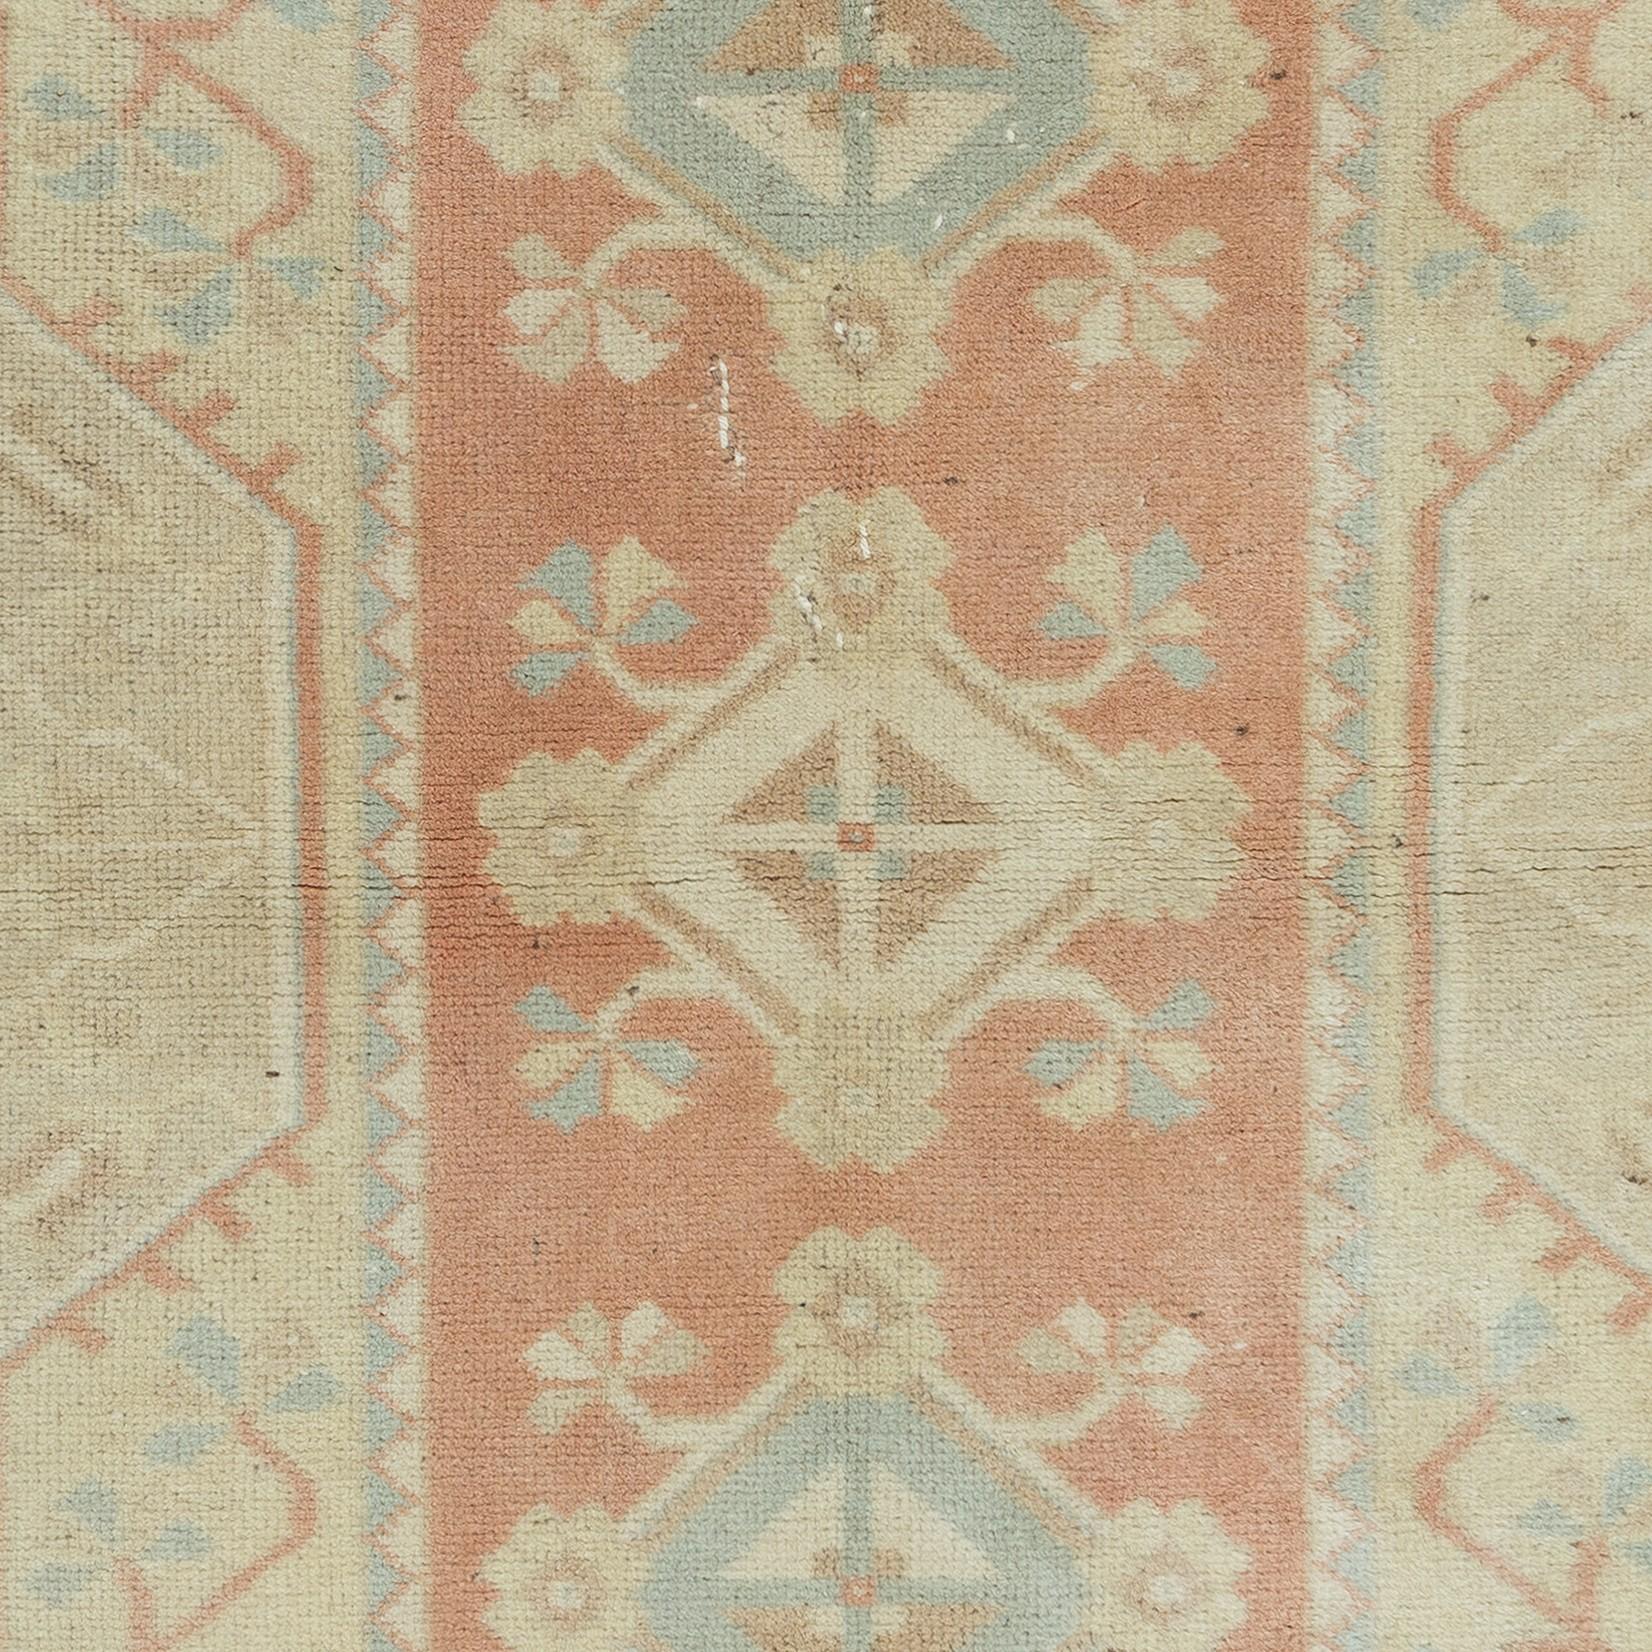 2.6x4.2 Ft Faded Vintage Handmade Turkish Milas Accent Rug in Soft Red & Beige In Good Condition For Sale In Philadelphia, PA